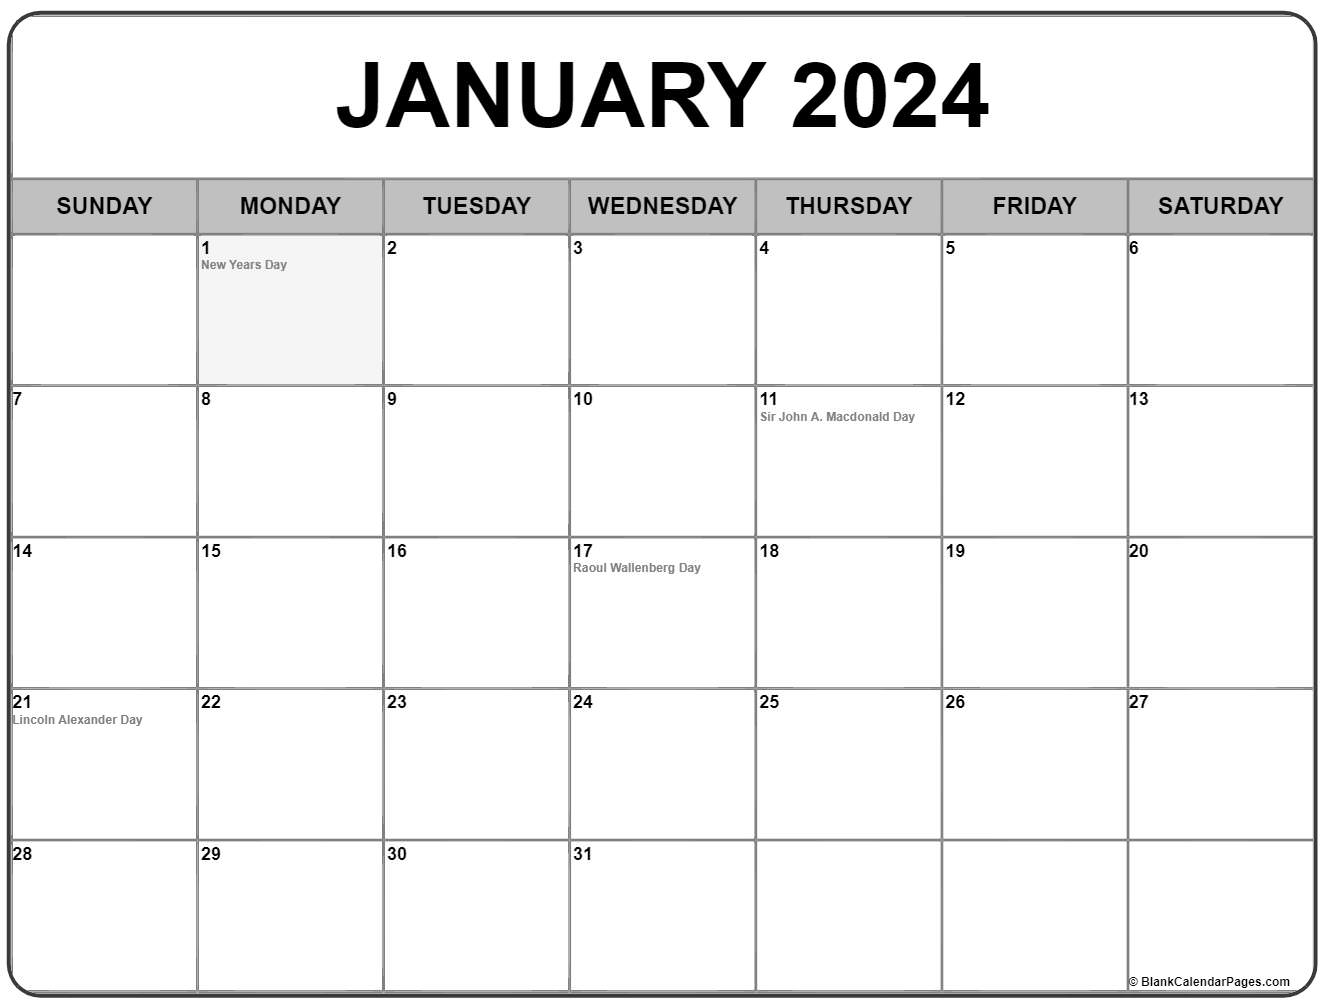 dhrm-pay-and-holiday-calendar-2024-cool-amazing-incredible-printable-calendar-for-2024-free